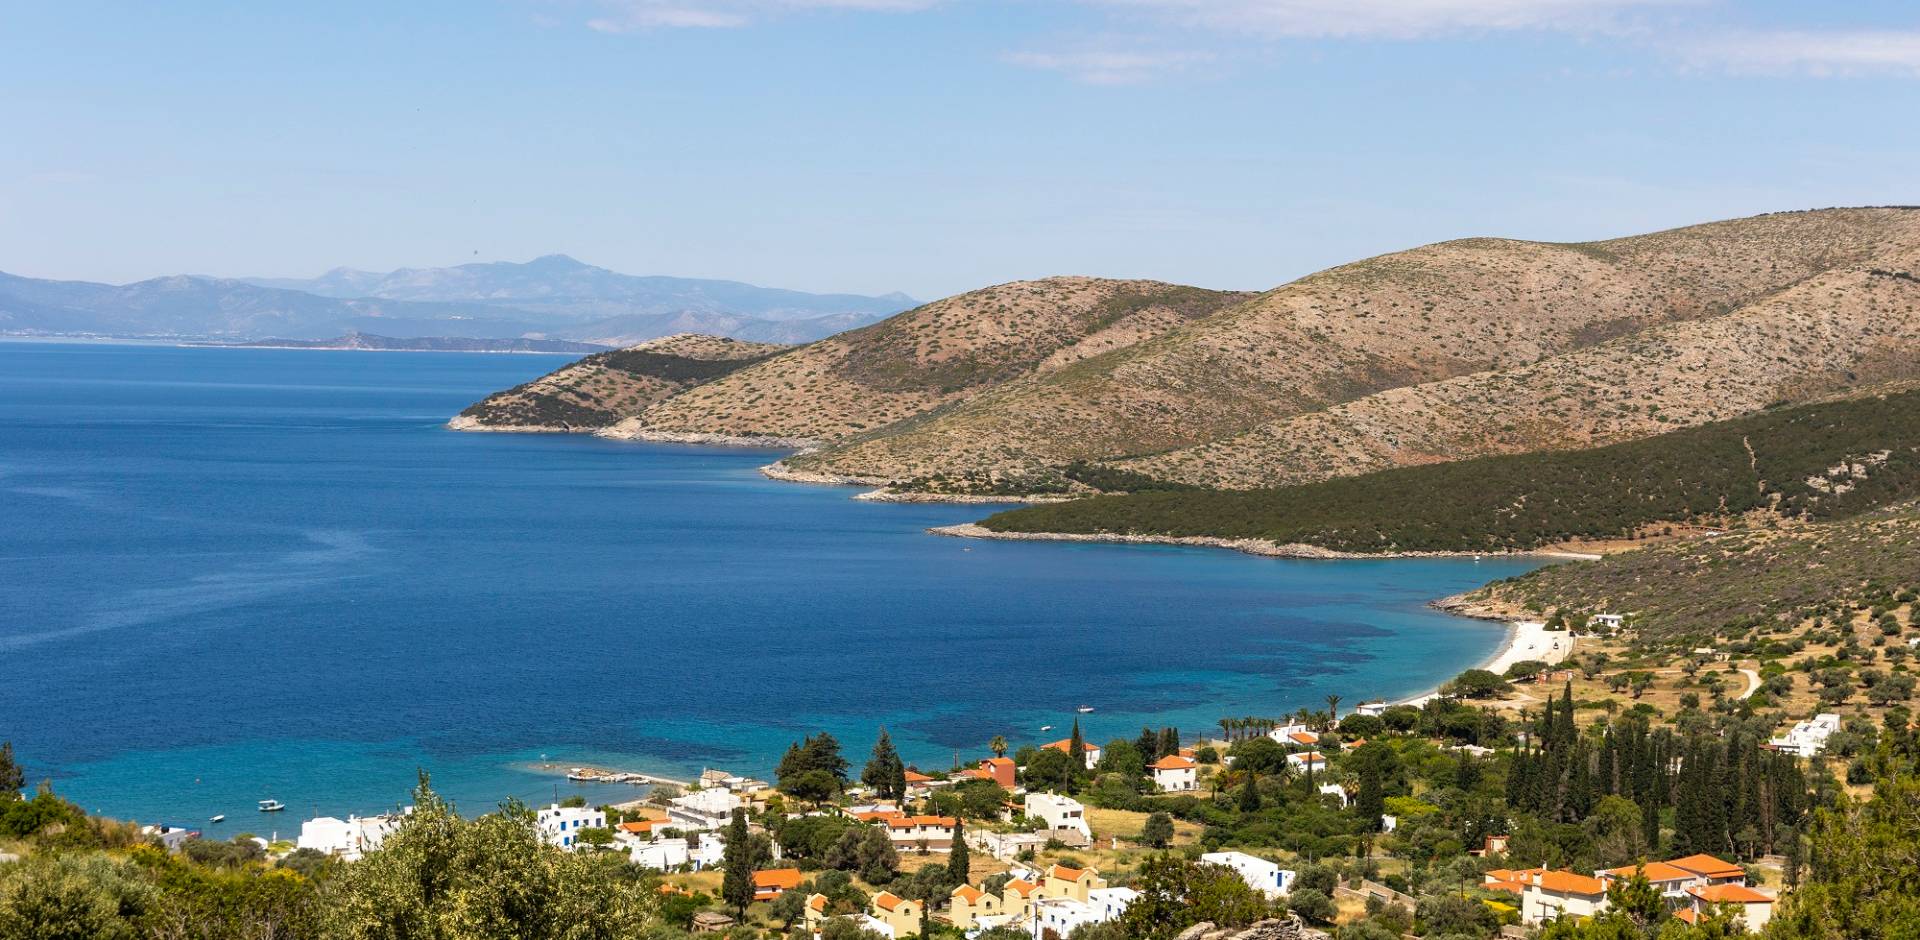 Discover Nea Styra in Evia - the perfect getaway from Athens!